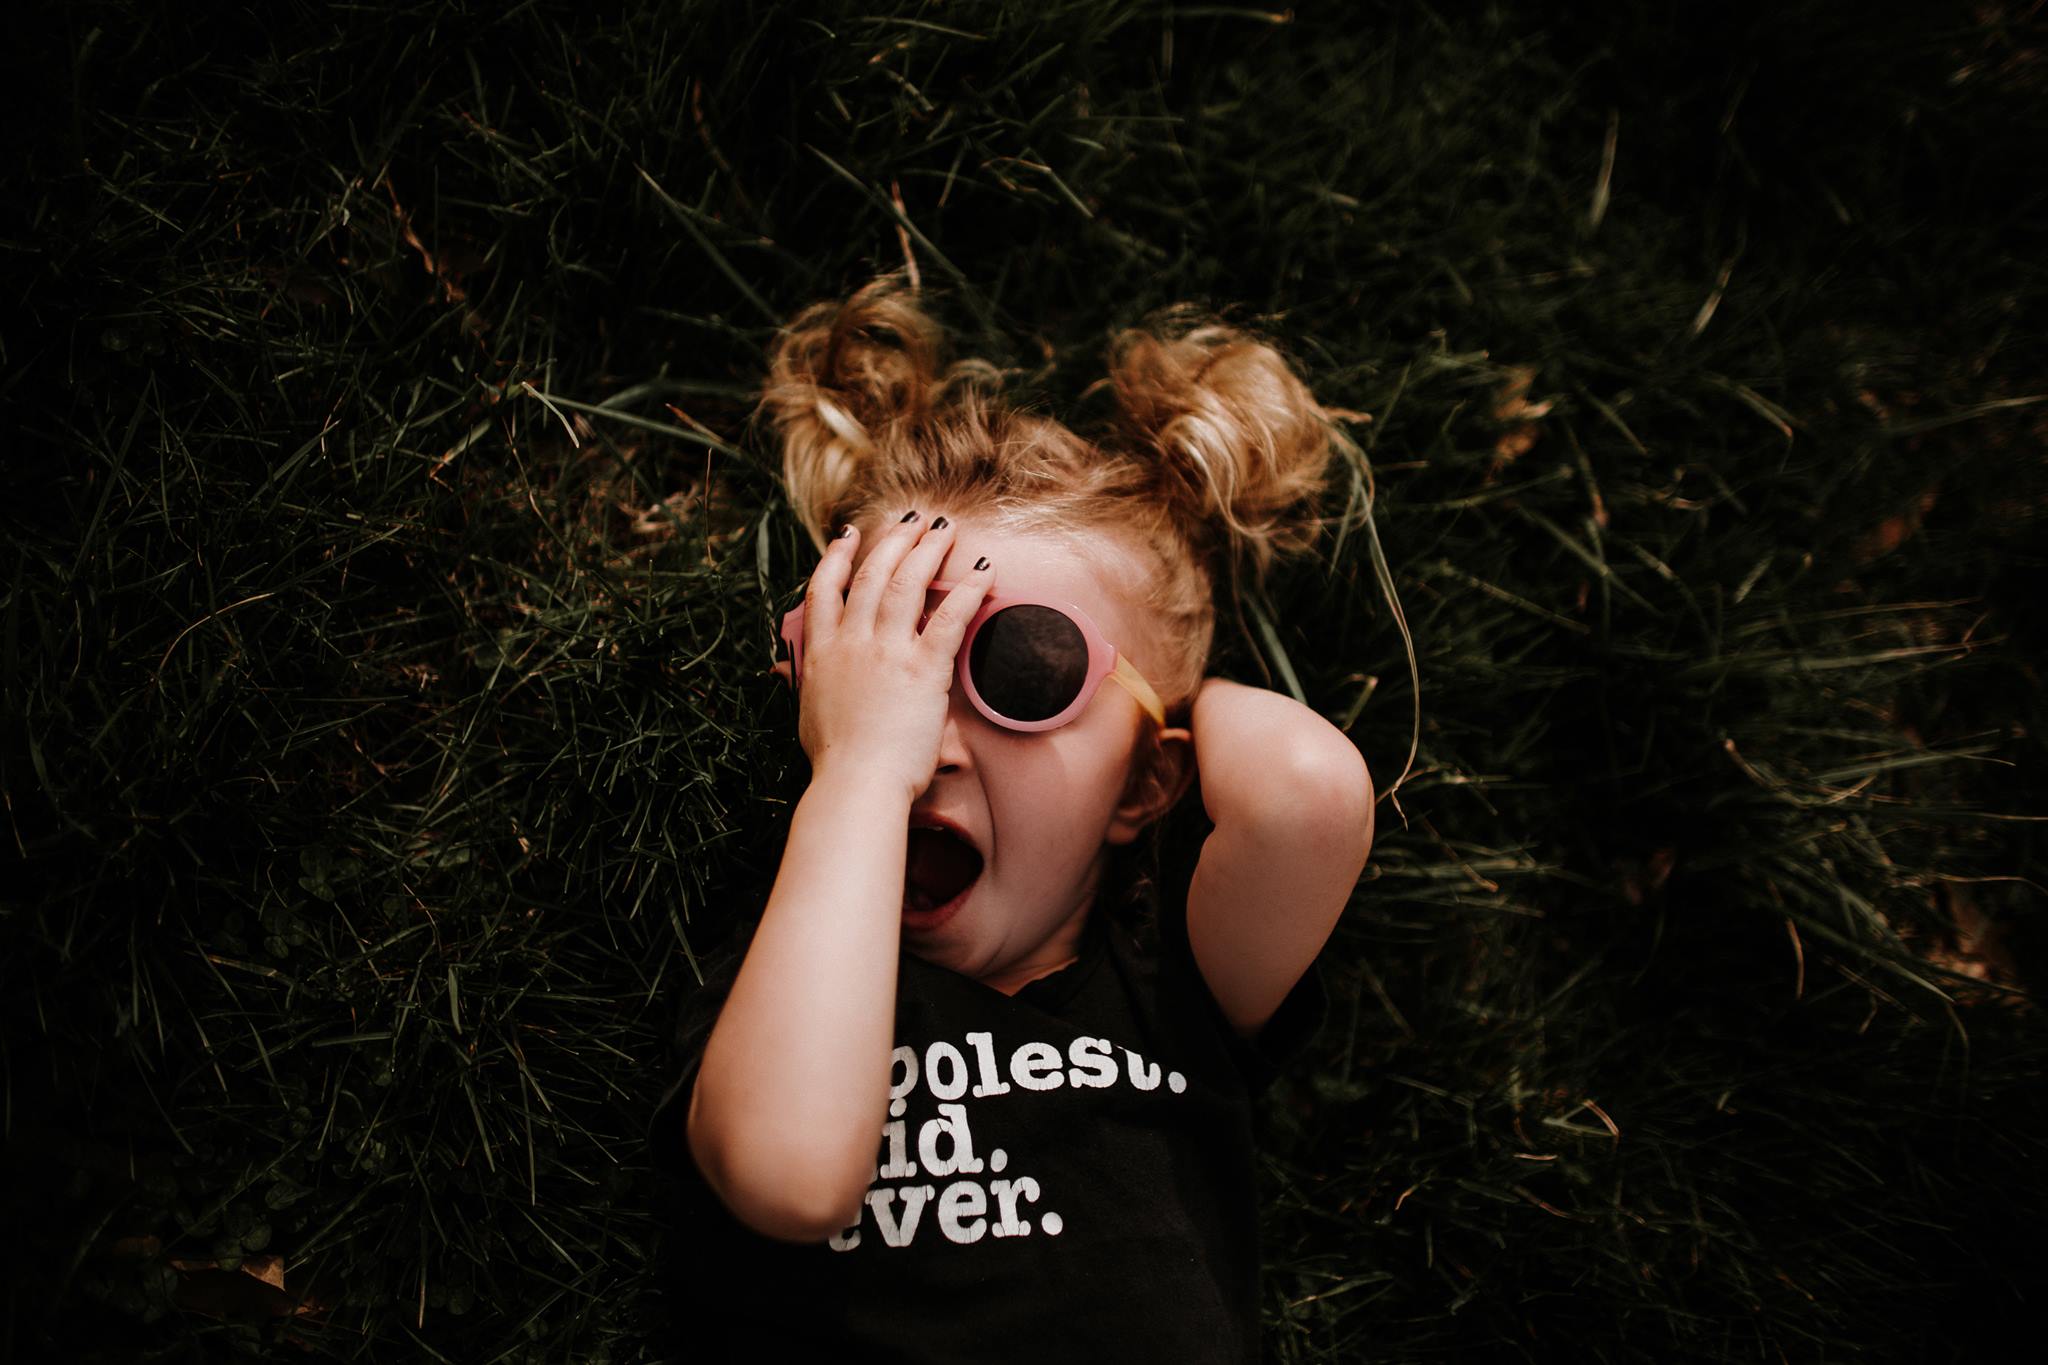 spring pictures of kids, little girl wearing sunglasses laying in grass, funny kid shirts, little girl fashion, sassy little girl